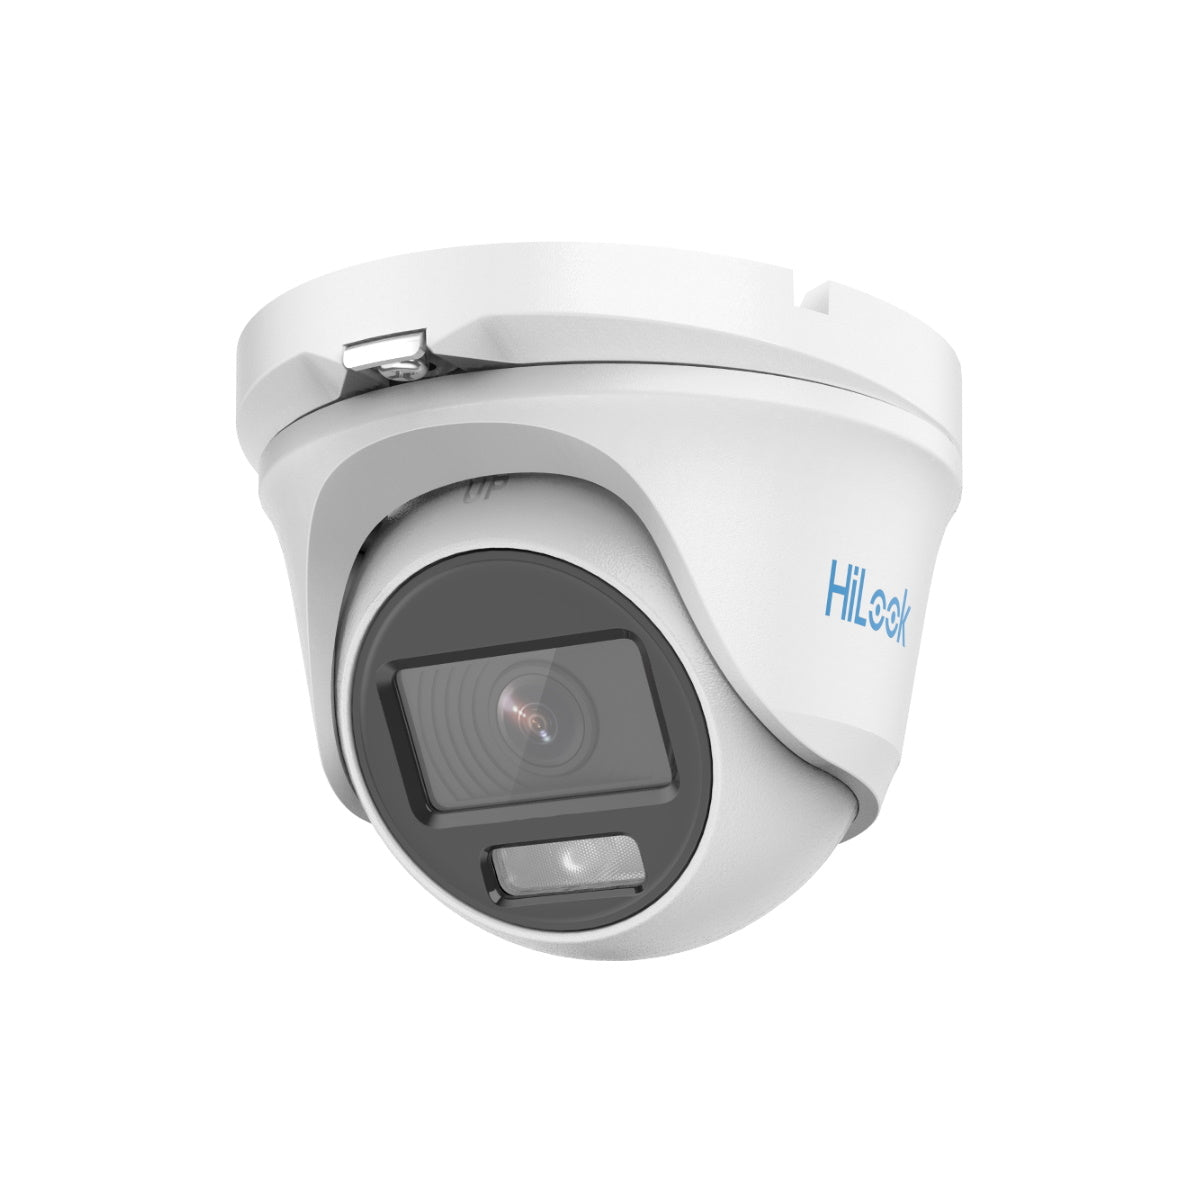 THC-T129-M 2.8mm HiLook 2MP 1080P HD-TVI ColorVu analogue turret camera with 20m LED in white or grey